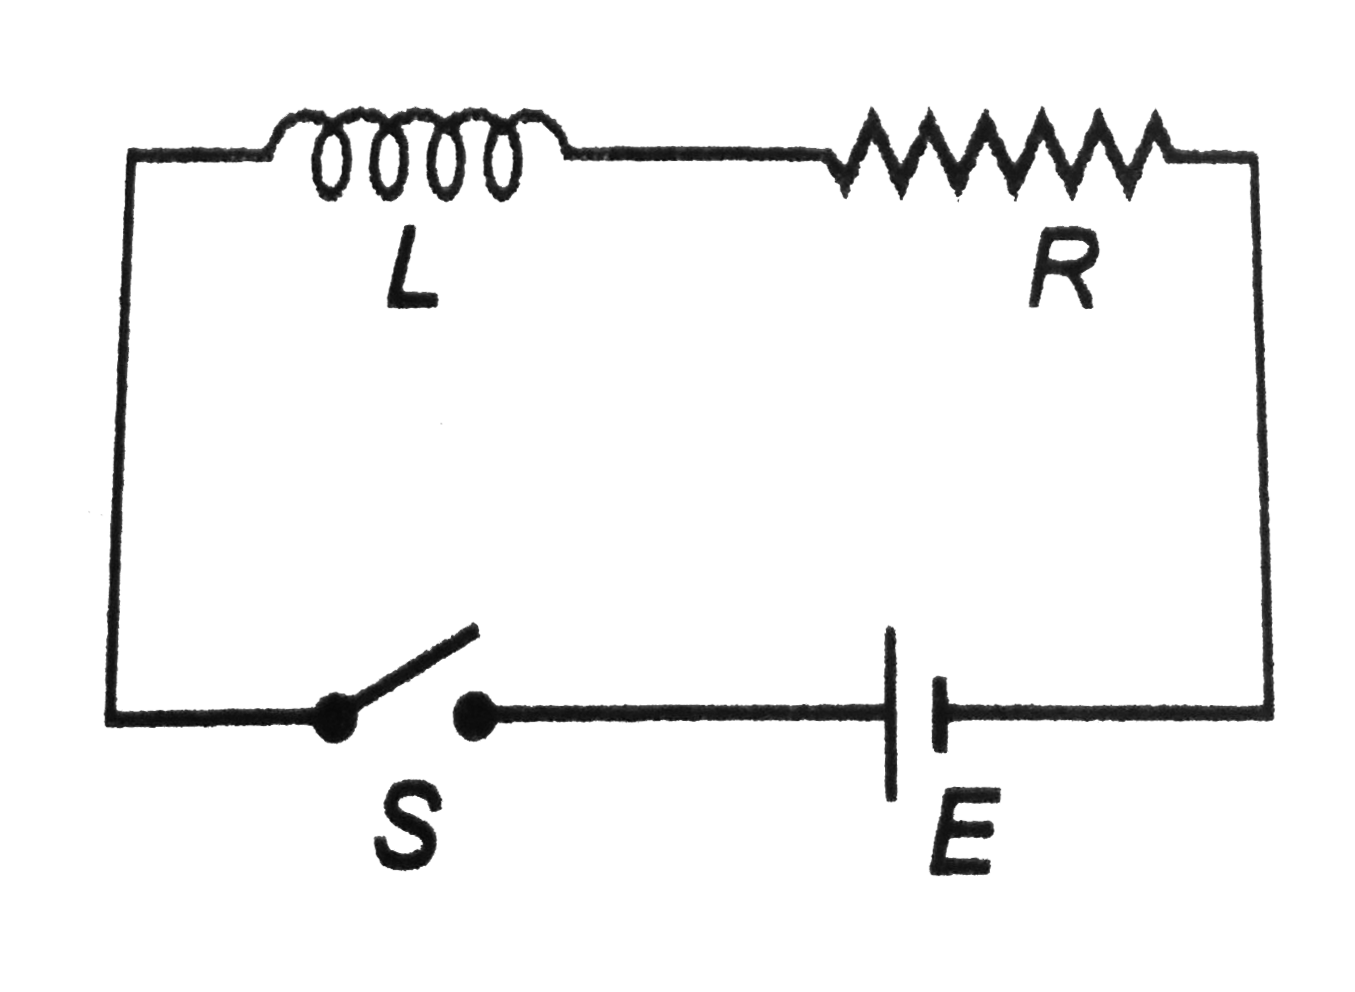 In the circuit shown in figure, the switch S is closed at t=0. If VL is the voltge induced across the inductor and i is the instantaneous current, the correct variation of VL versus is given by